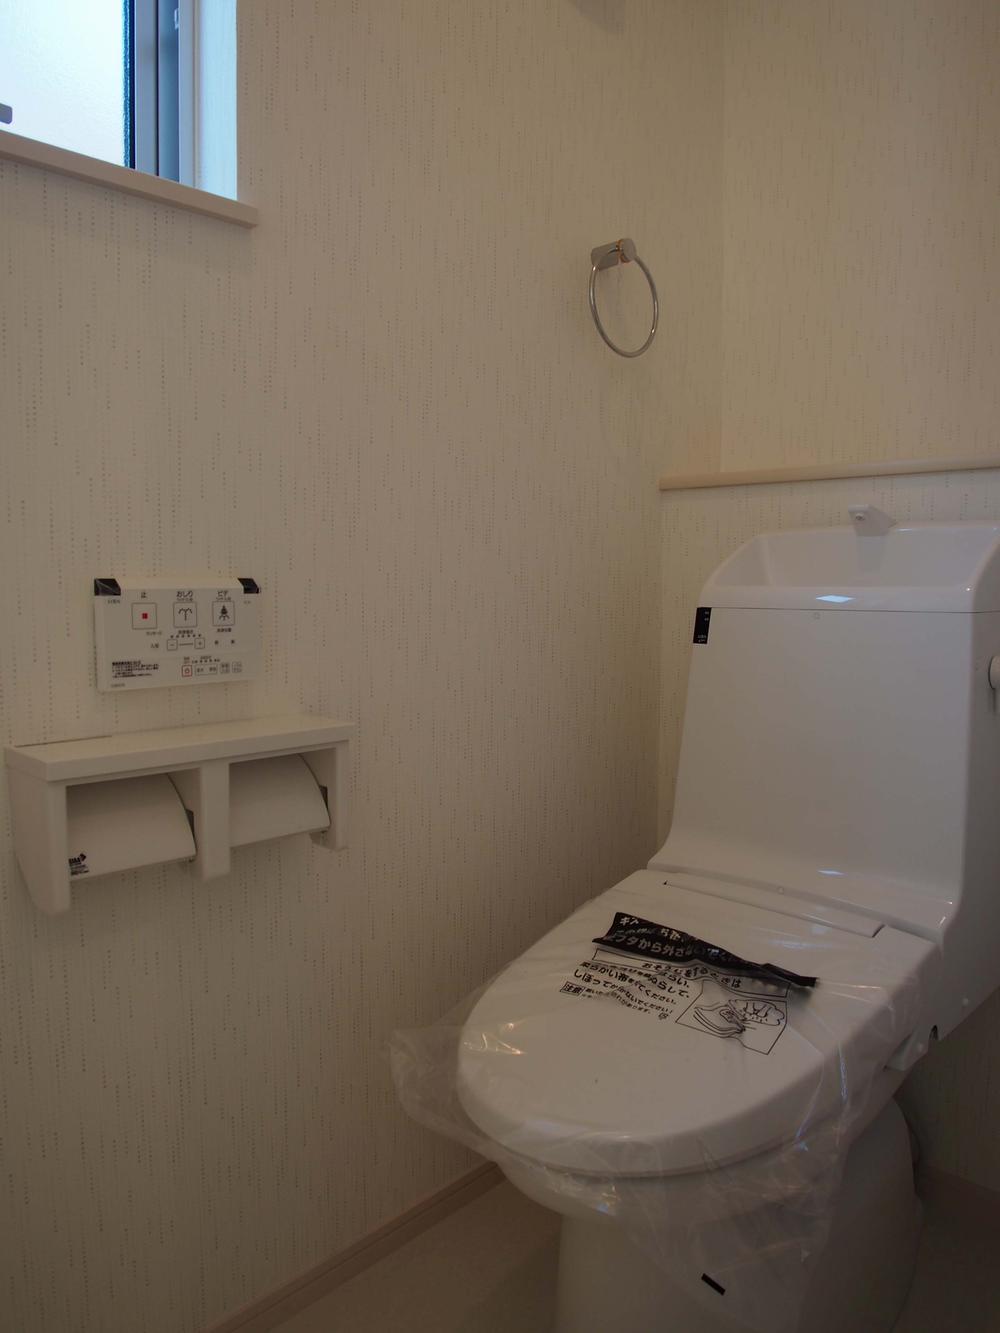 Toilet. With storage is on the wall